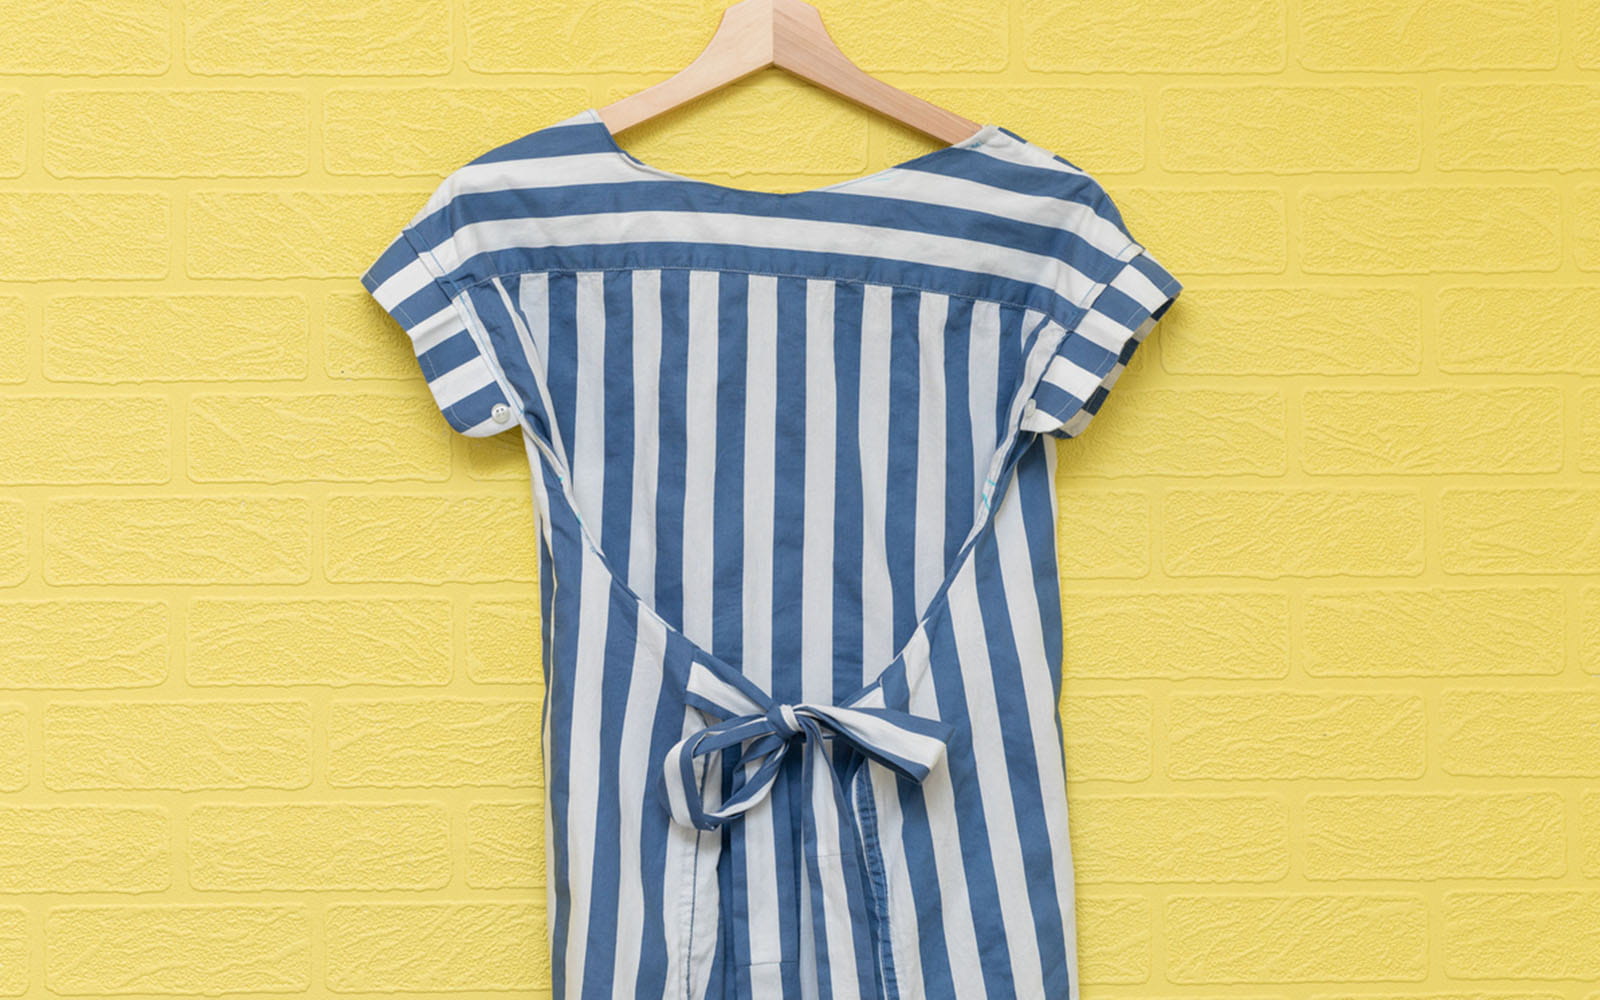 Blue and white striped top against yellow wall